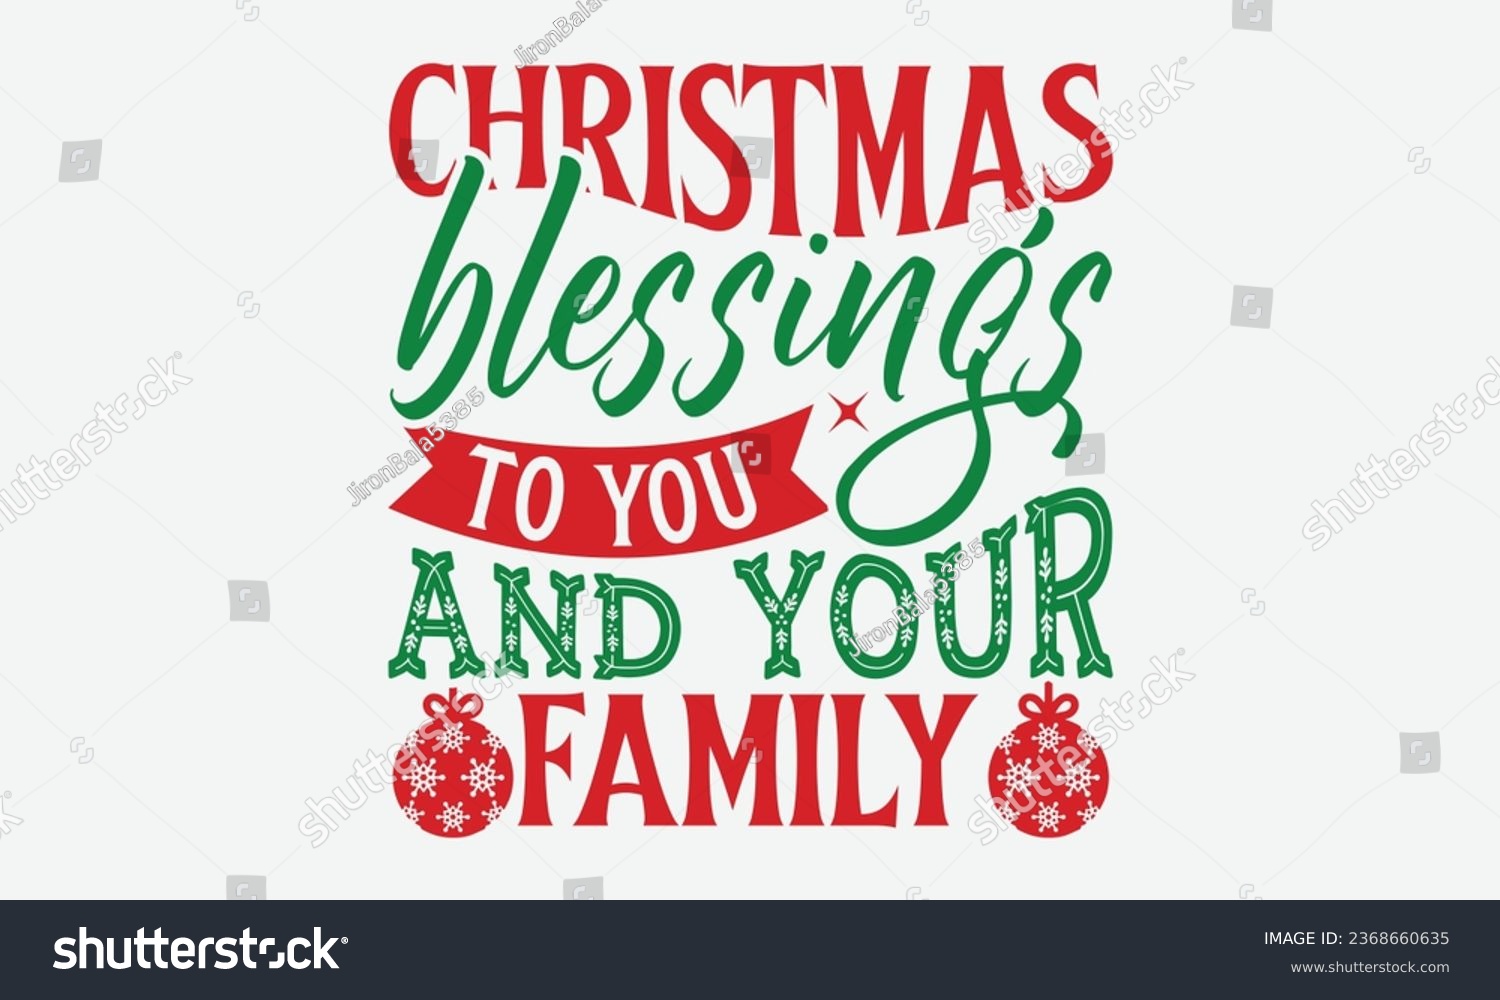 SVG of Christmas Blessings To You And Your Family - Christmas T-shirt Design, Handmade calligraphy vector illustration, HOllyday  Design, Cutting Cricut and Silhouette, EPS 10.
 svg